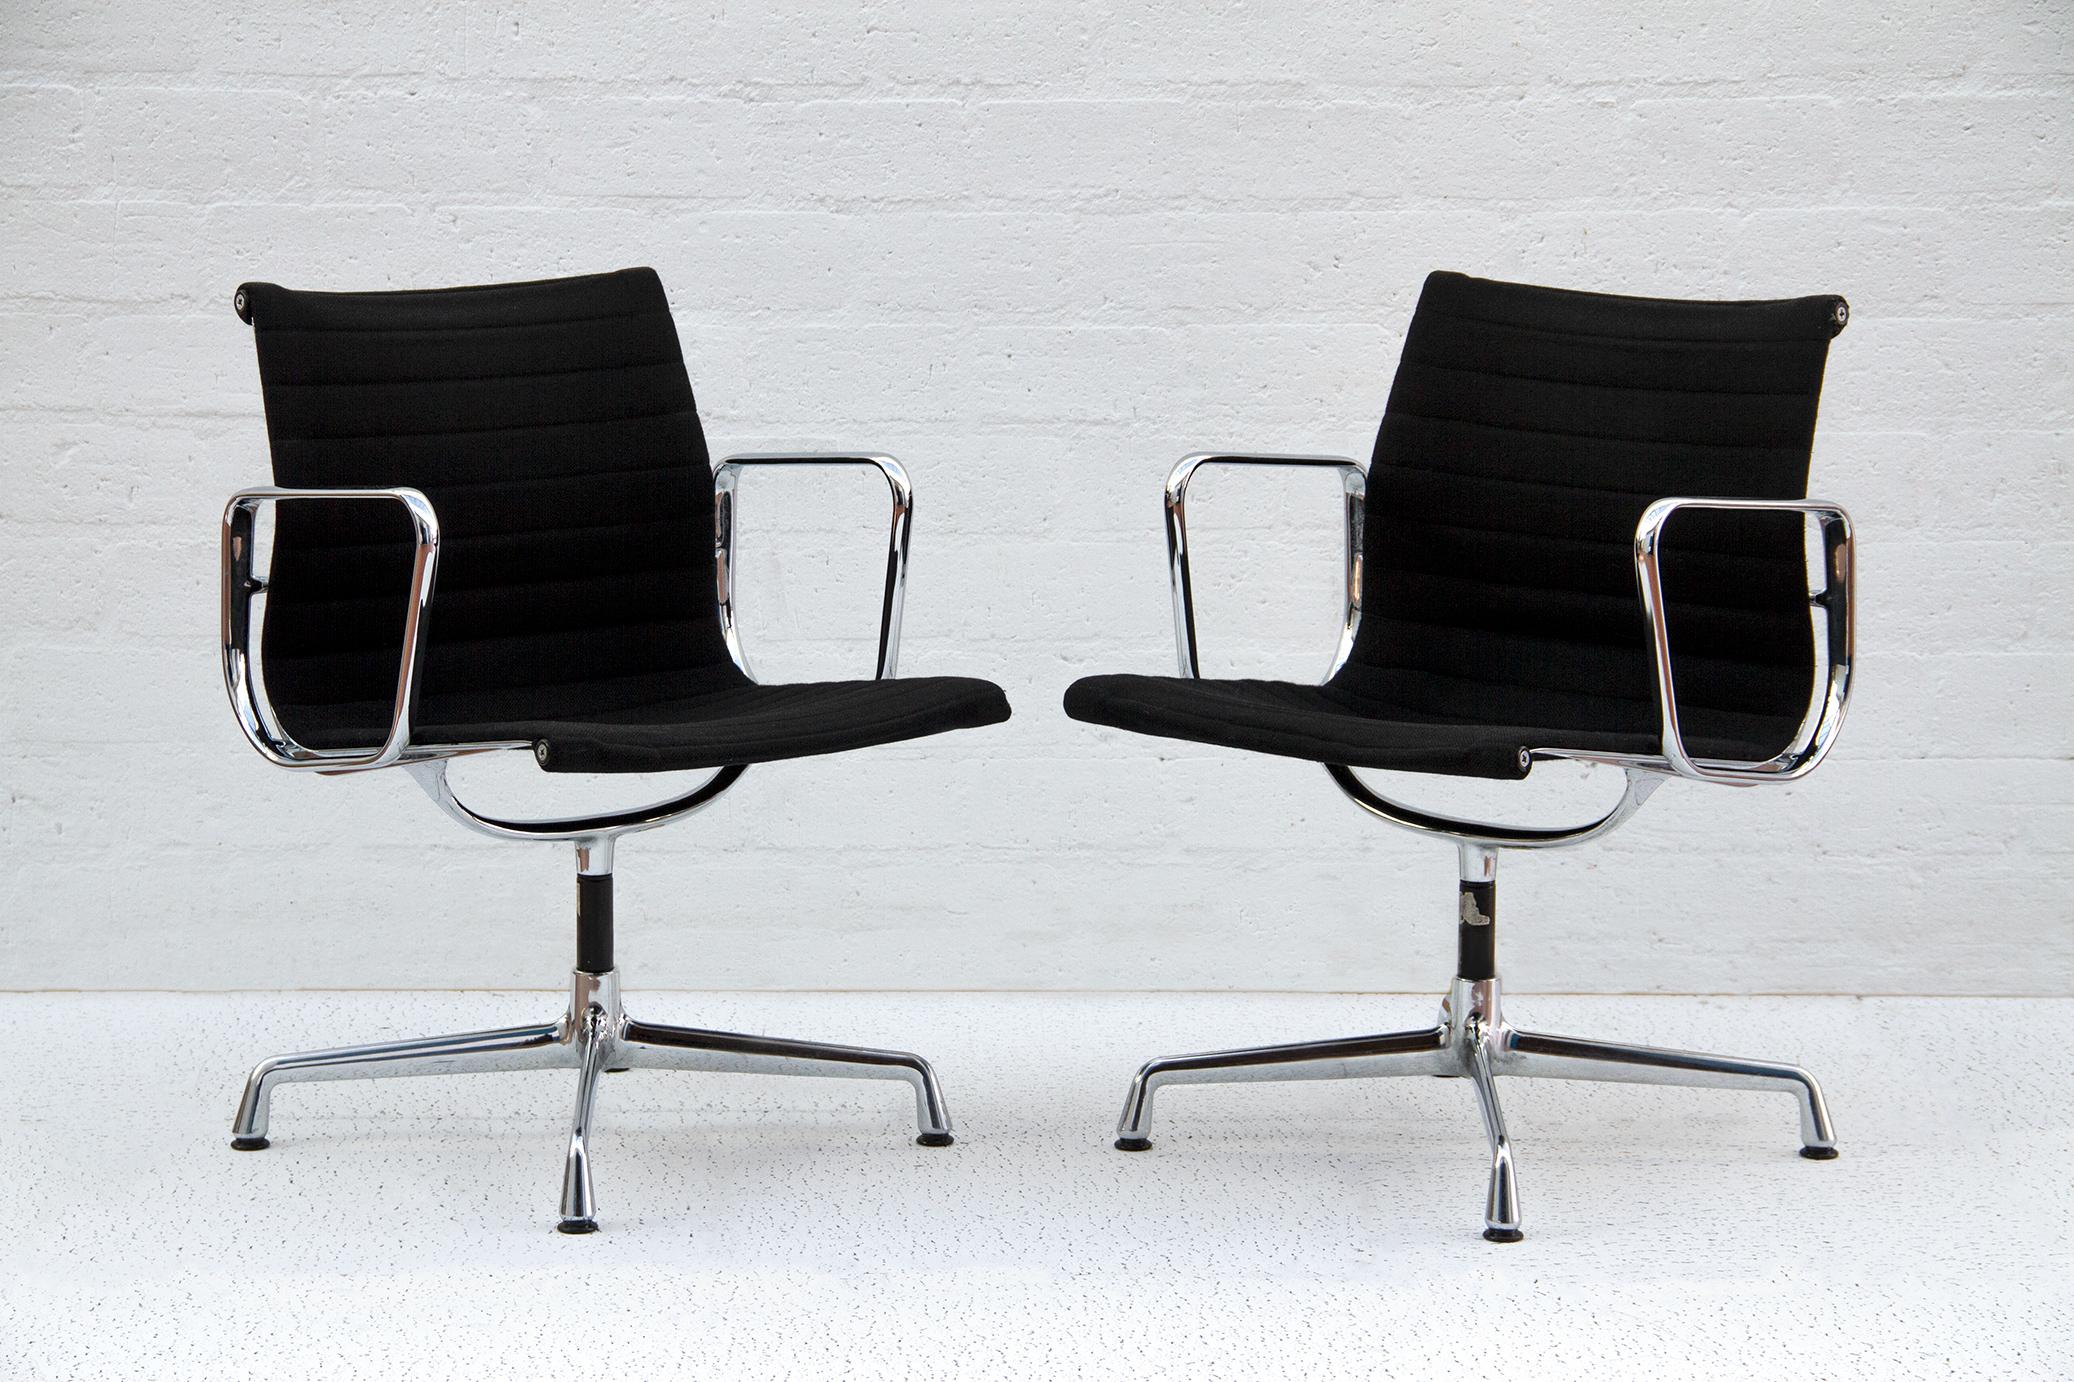 The EA 108 Office chair is one of the greatest design furniture of the 20th Century. The EA 108 Office Chair by Charles and Ray Eames need no introduction. An iconic object designed in 1958 that remain timeless over the years. Still, today after